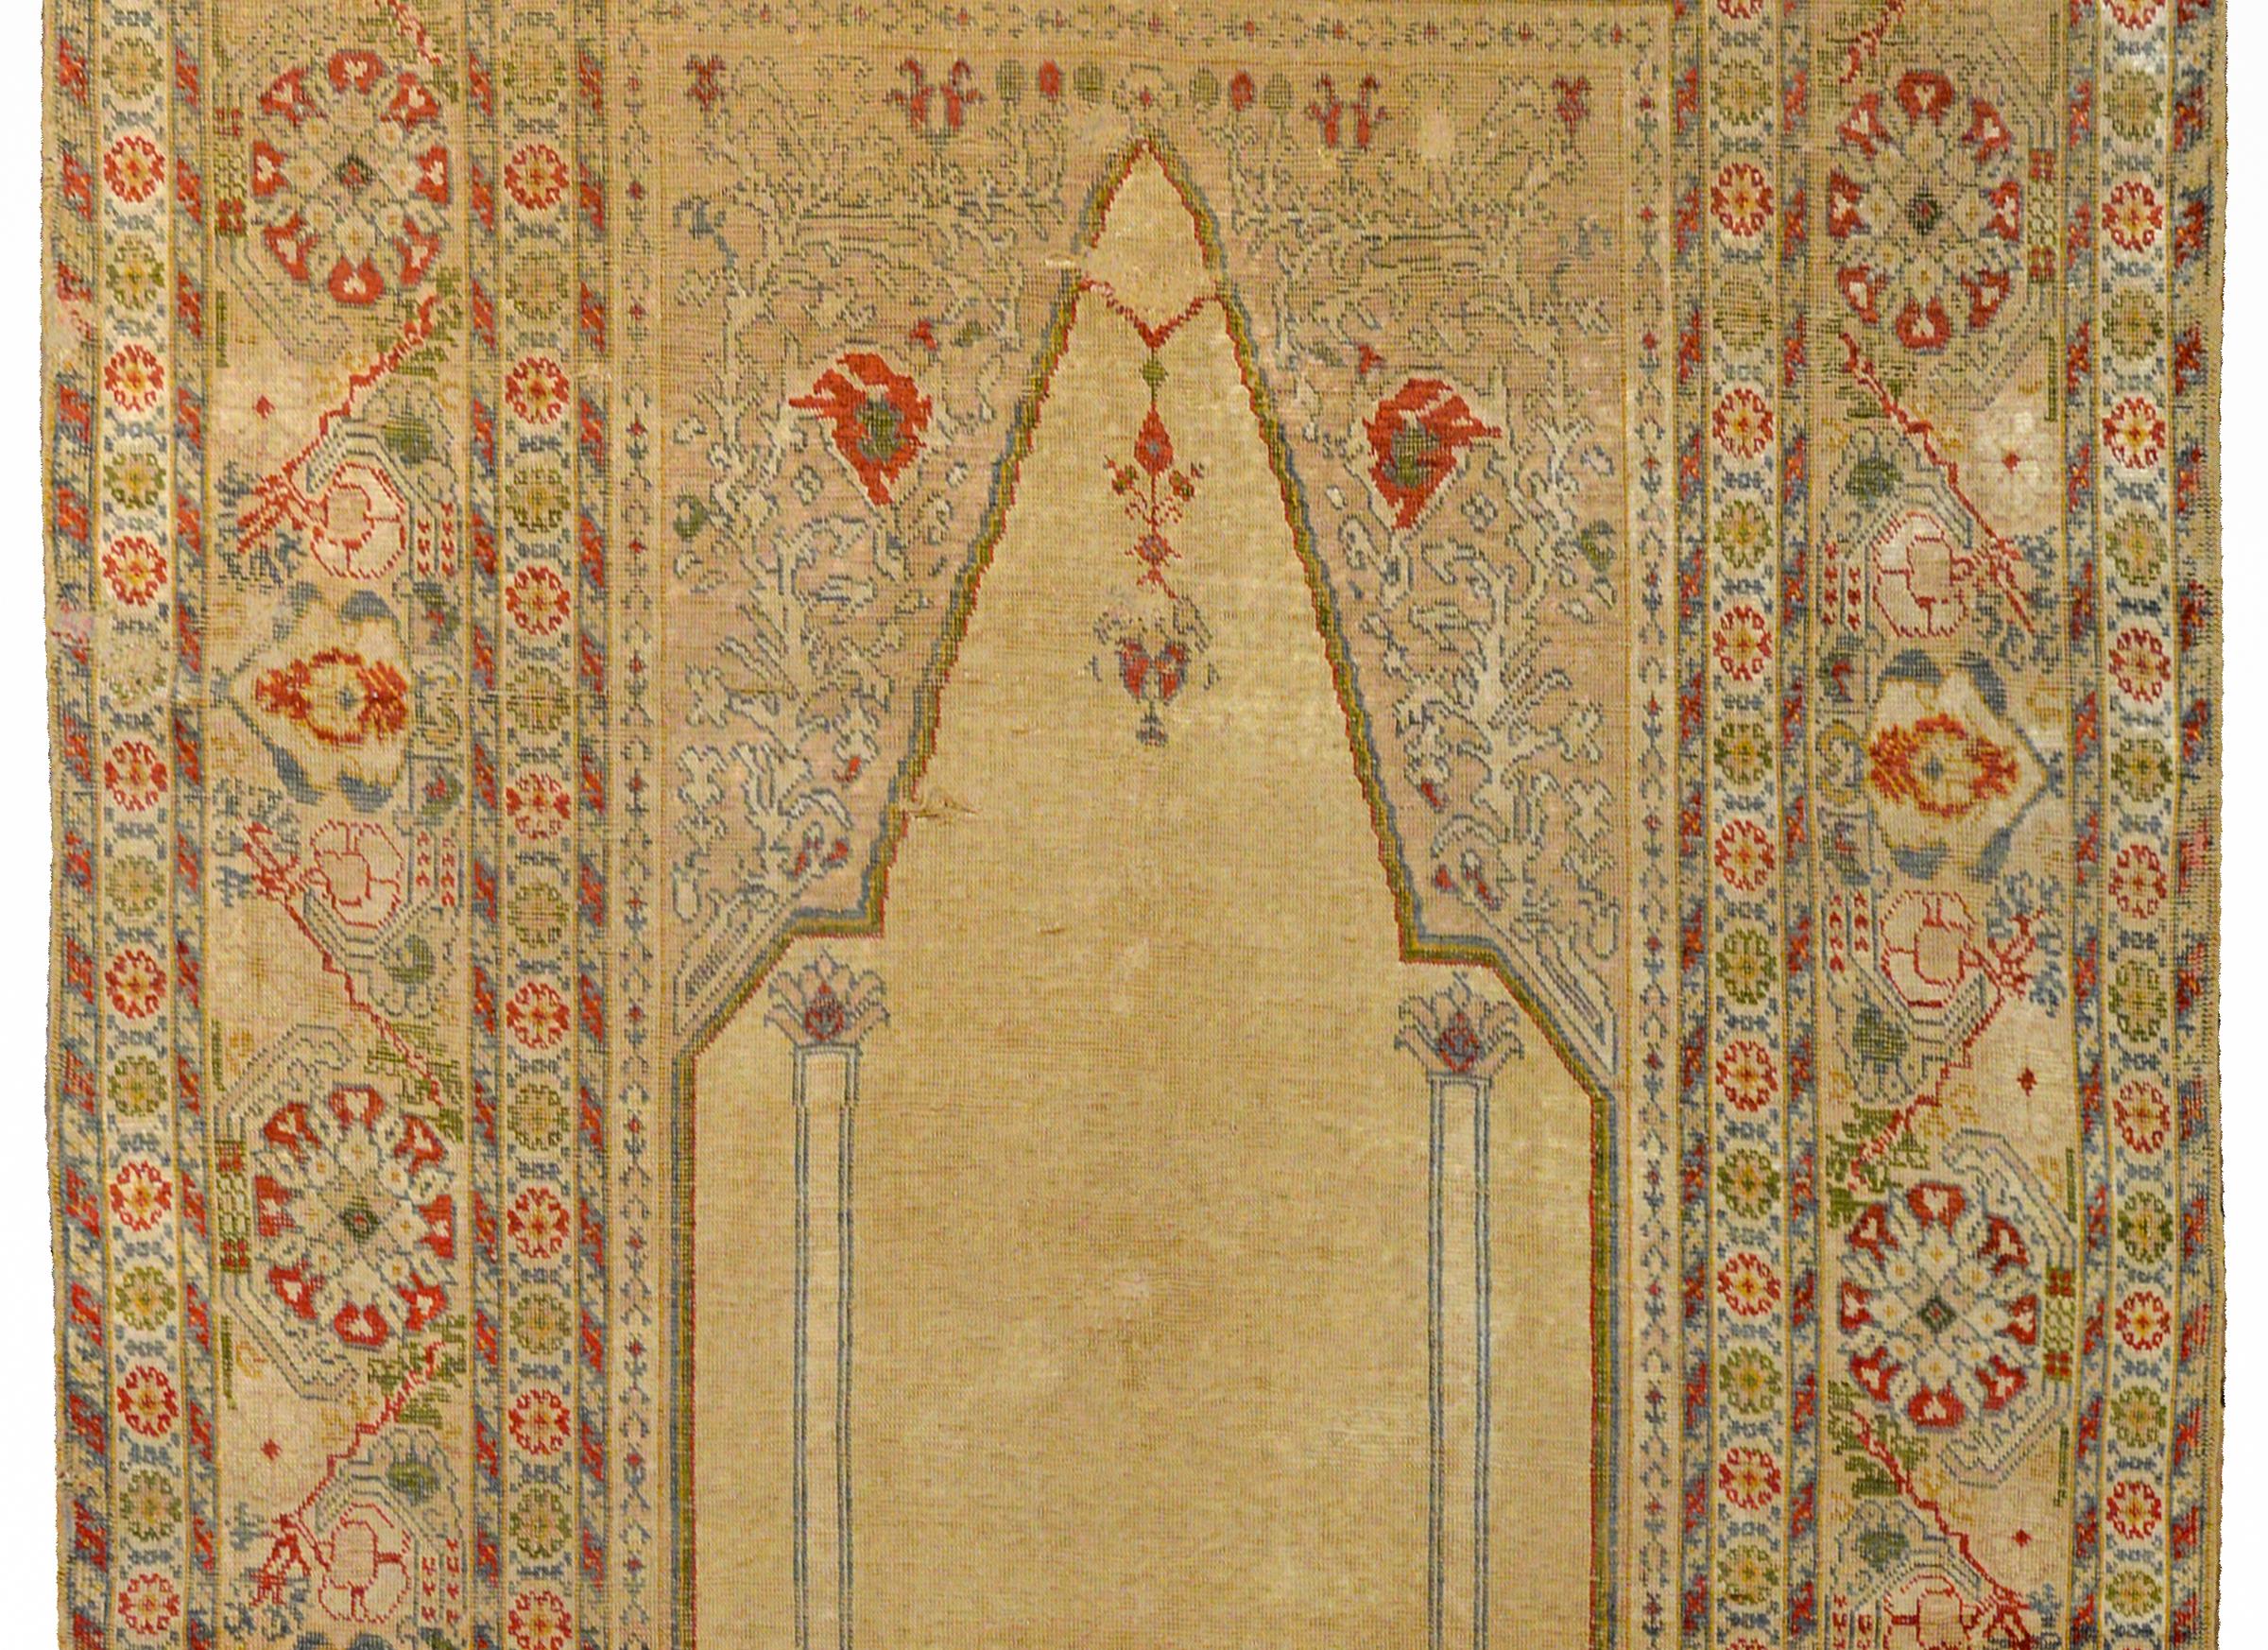 An outstanding early 20th century Turkish handwoven silk prayer rug with a beautiful pattern of large-scale flowers, scrolling vines and leaves, woven in coral, pale blue, green, and gold, all on a champagne colored ground.